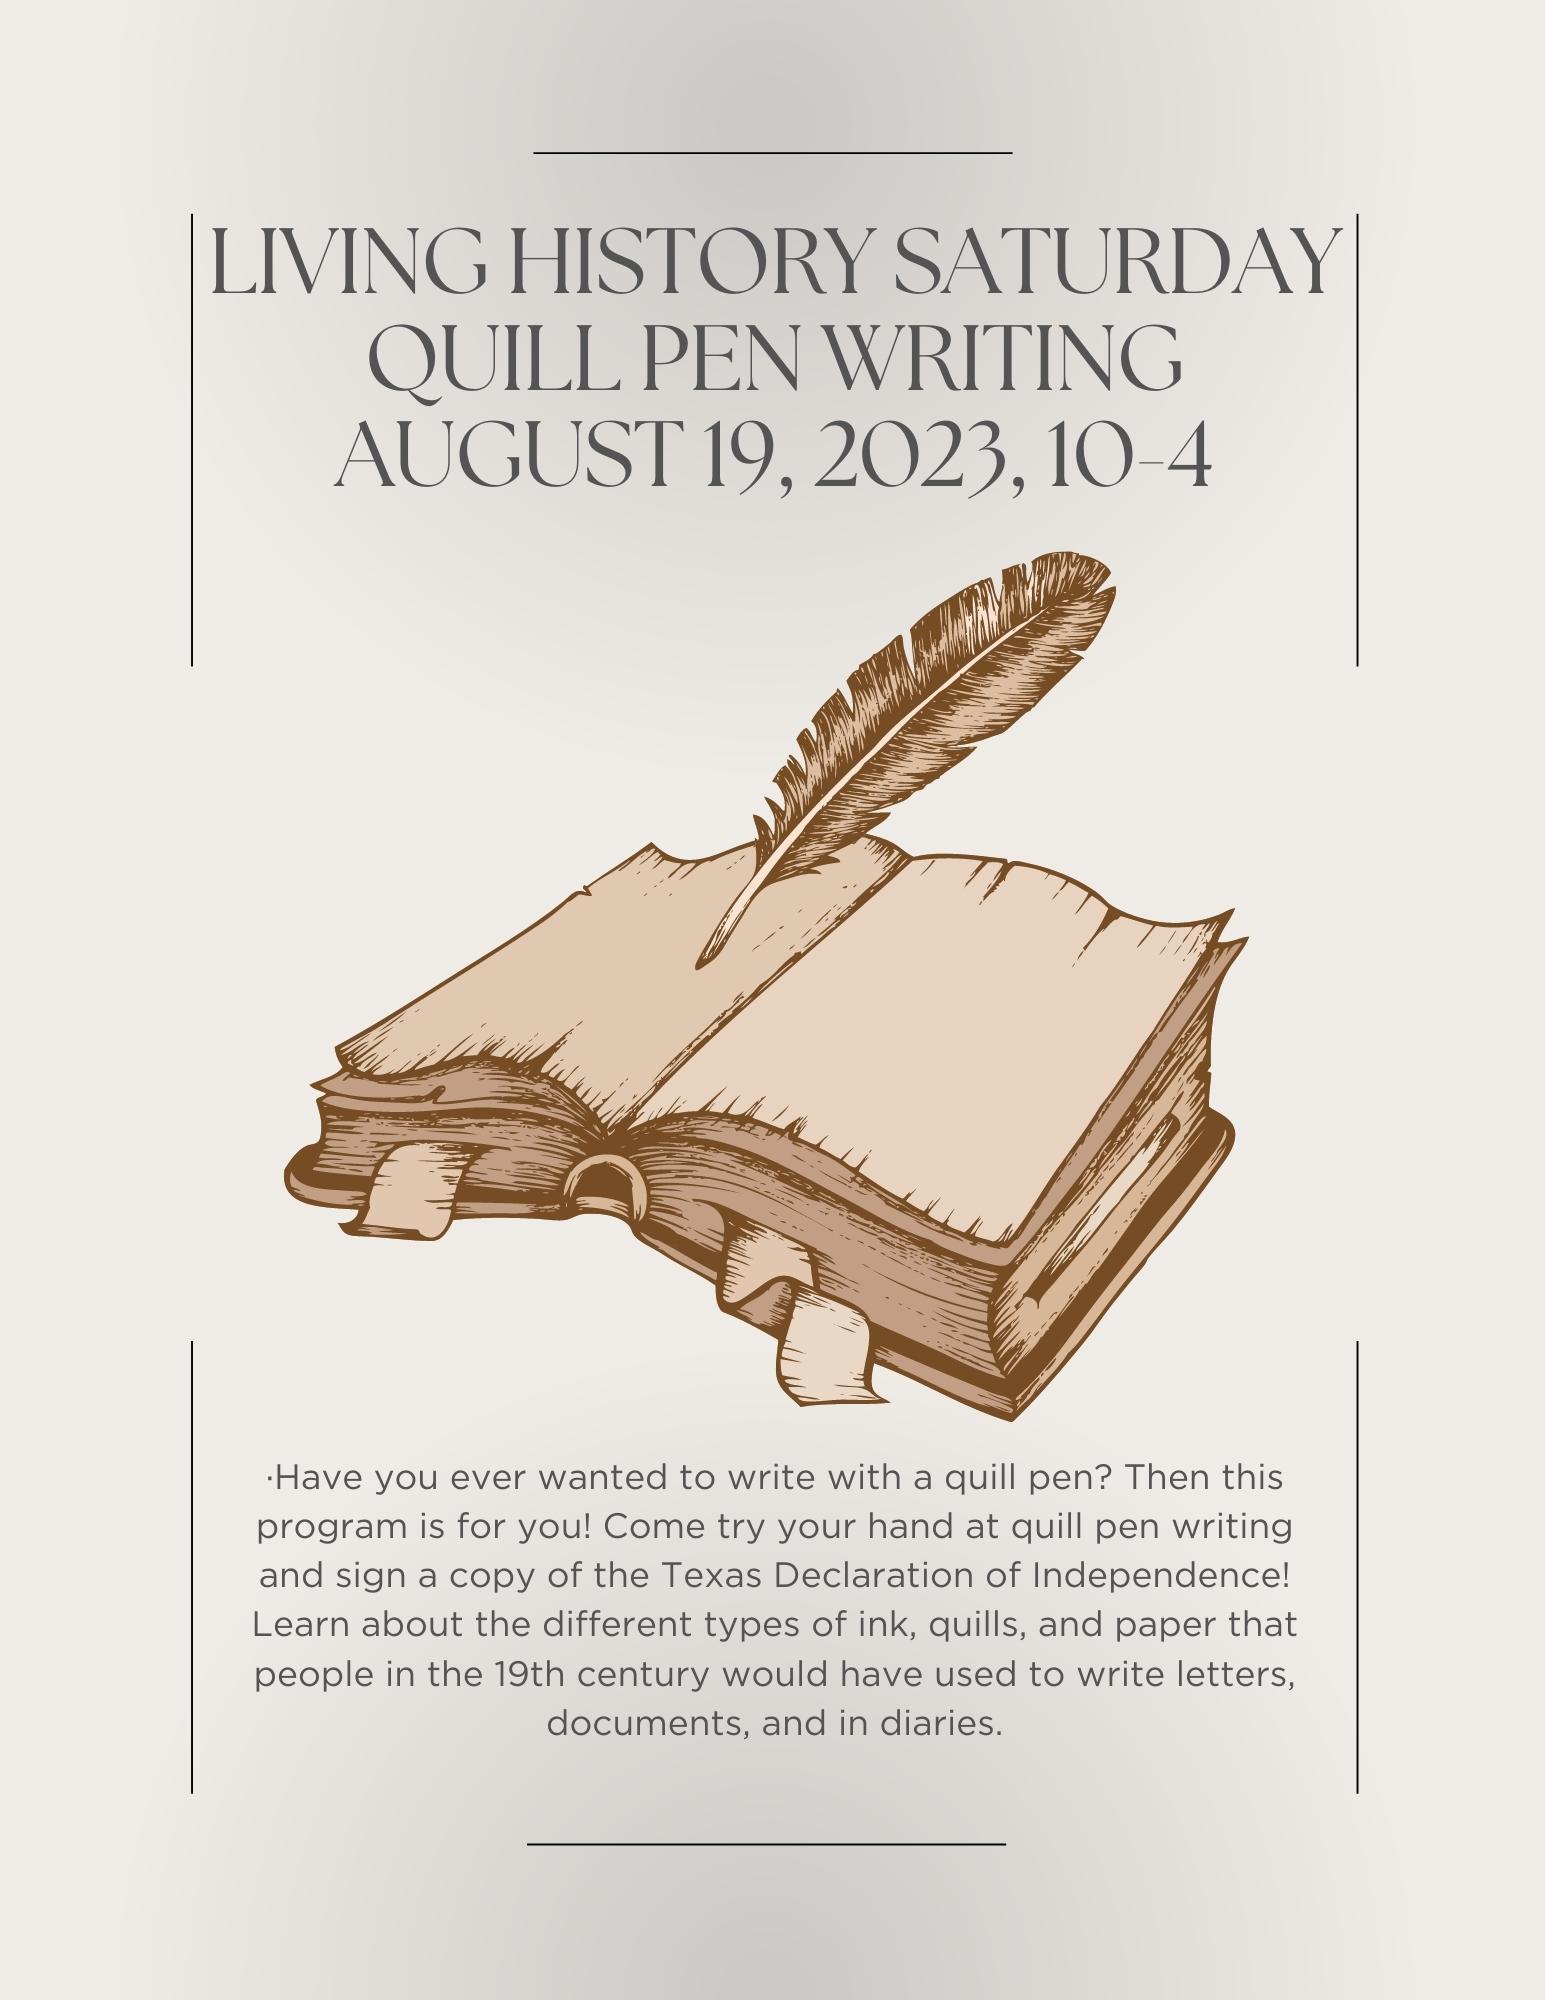 Living History Saturday: Quill Pen Writing